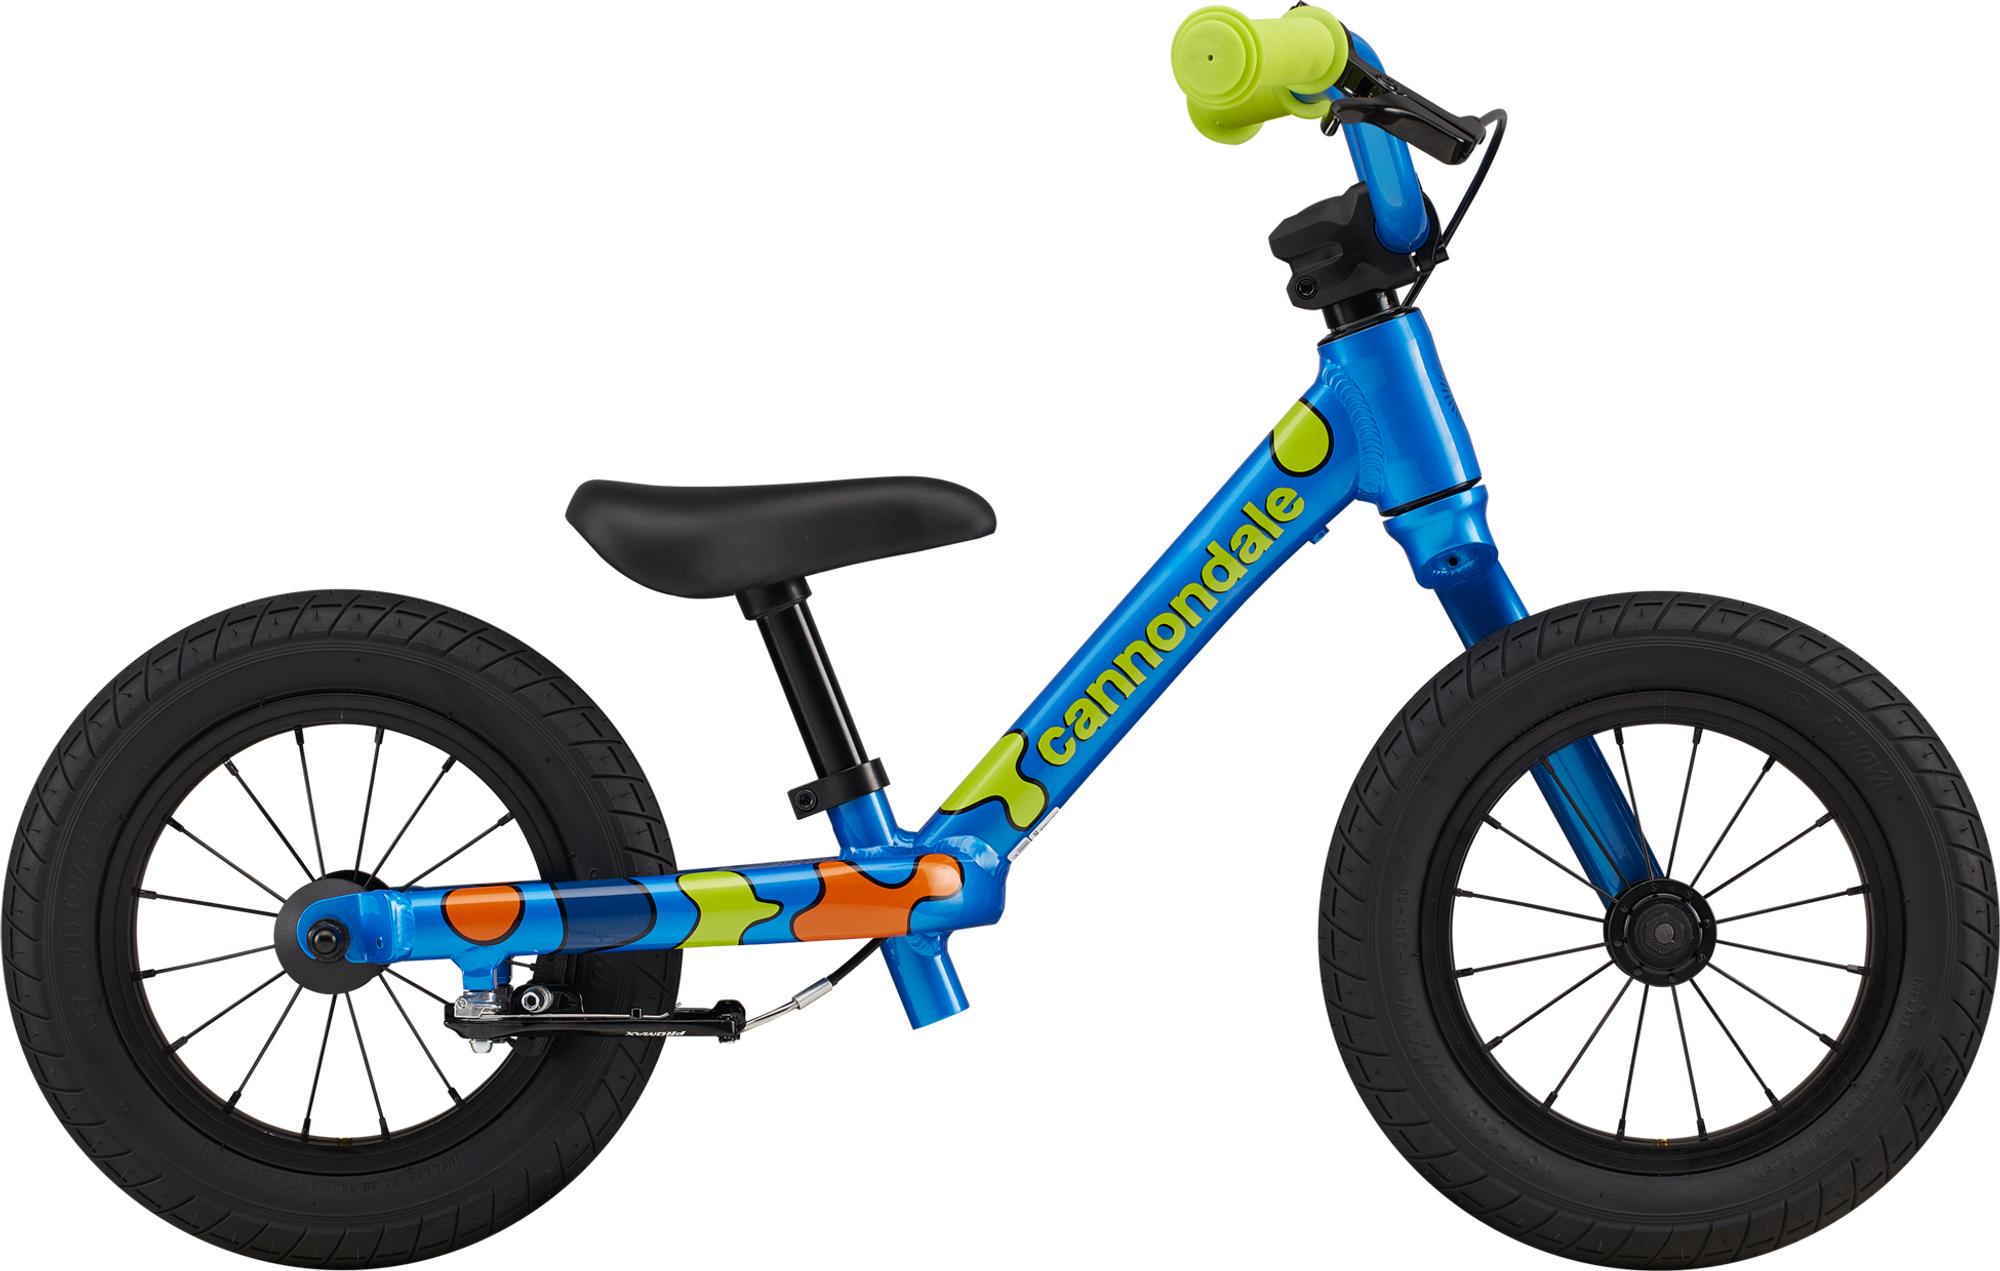 for 2 to 6 Years Old Boys Girls Kids with Carbon Steel Frame Adjustable Handlebar and Seat Toddler Walking Bicycle ACCEWIT Leting Ultra-Light Balance Bike 4.4 lbs 